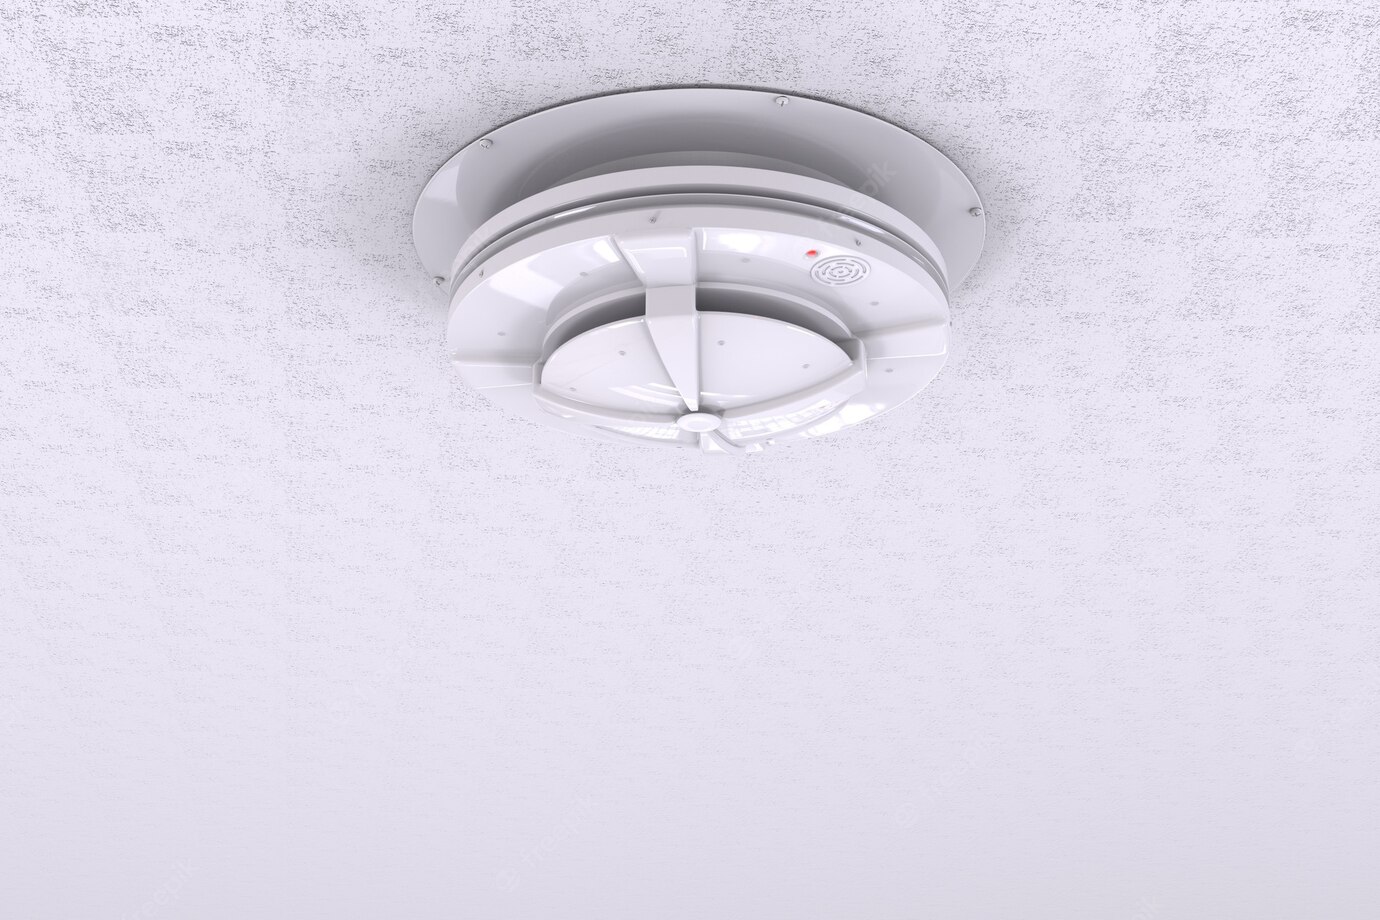 Smoke Detector Testing and Home Security System Problems